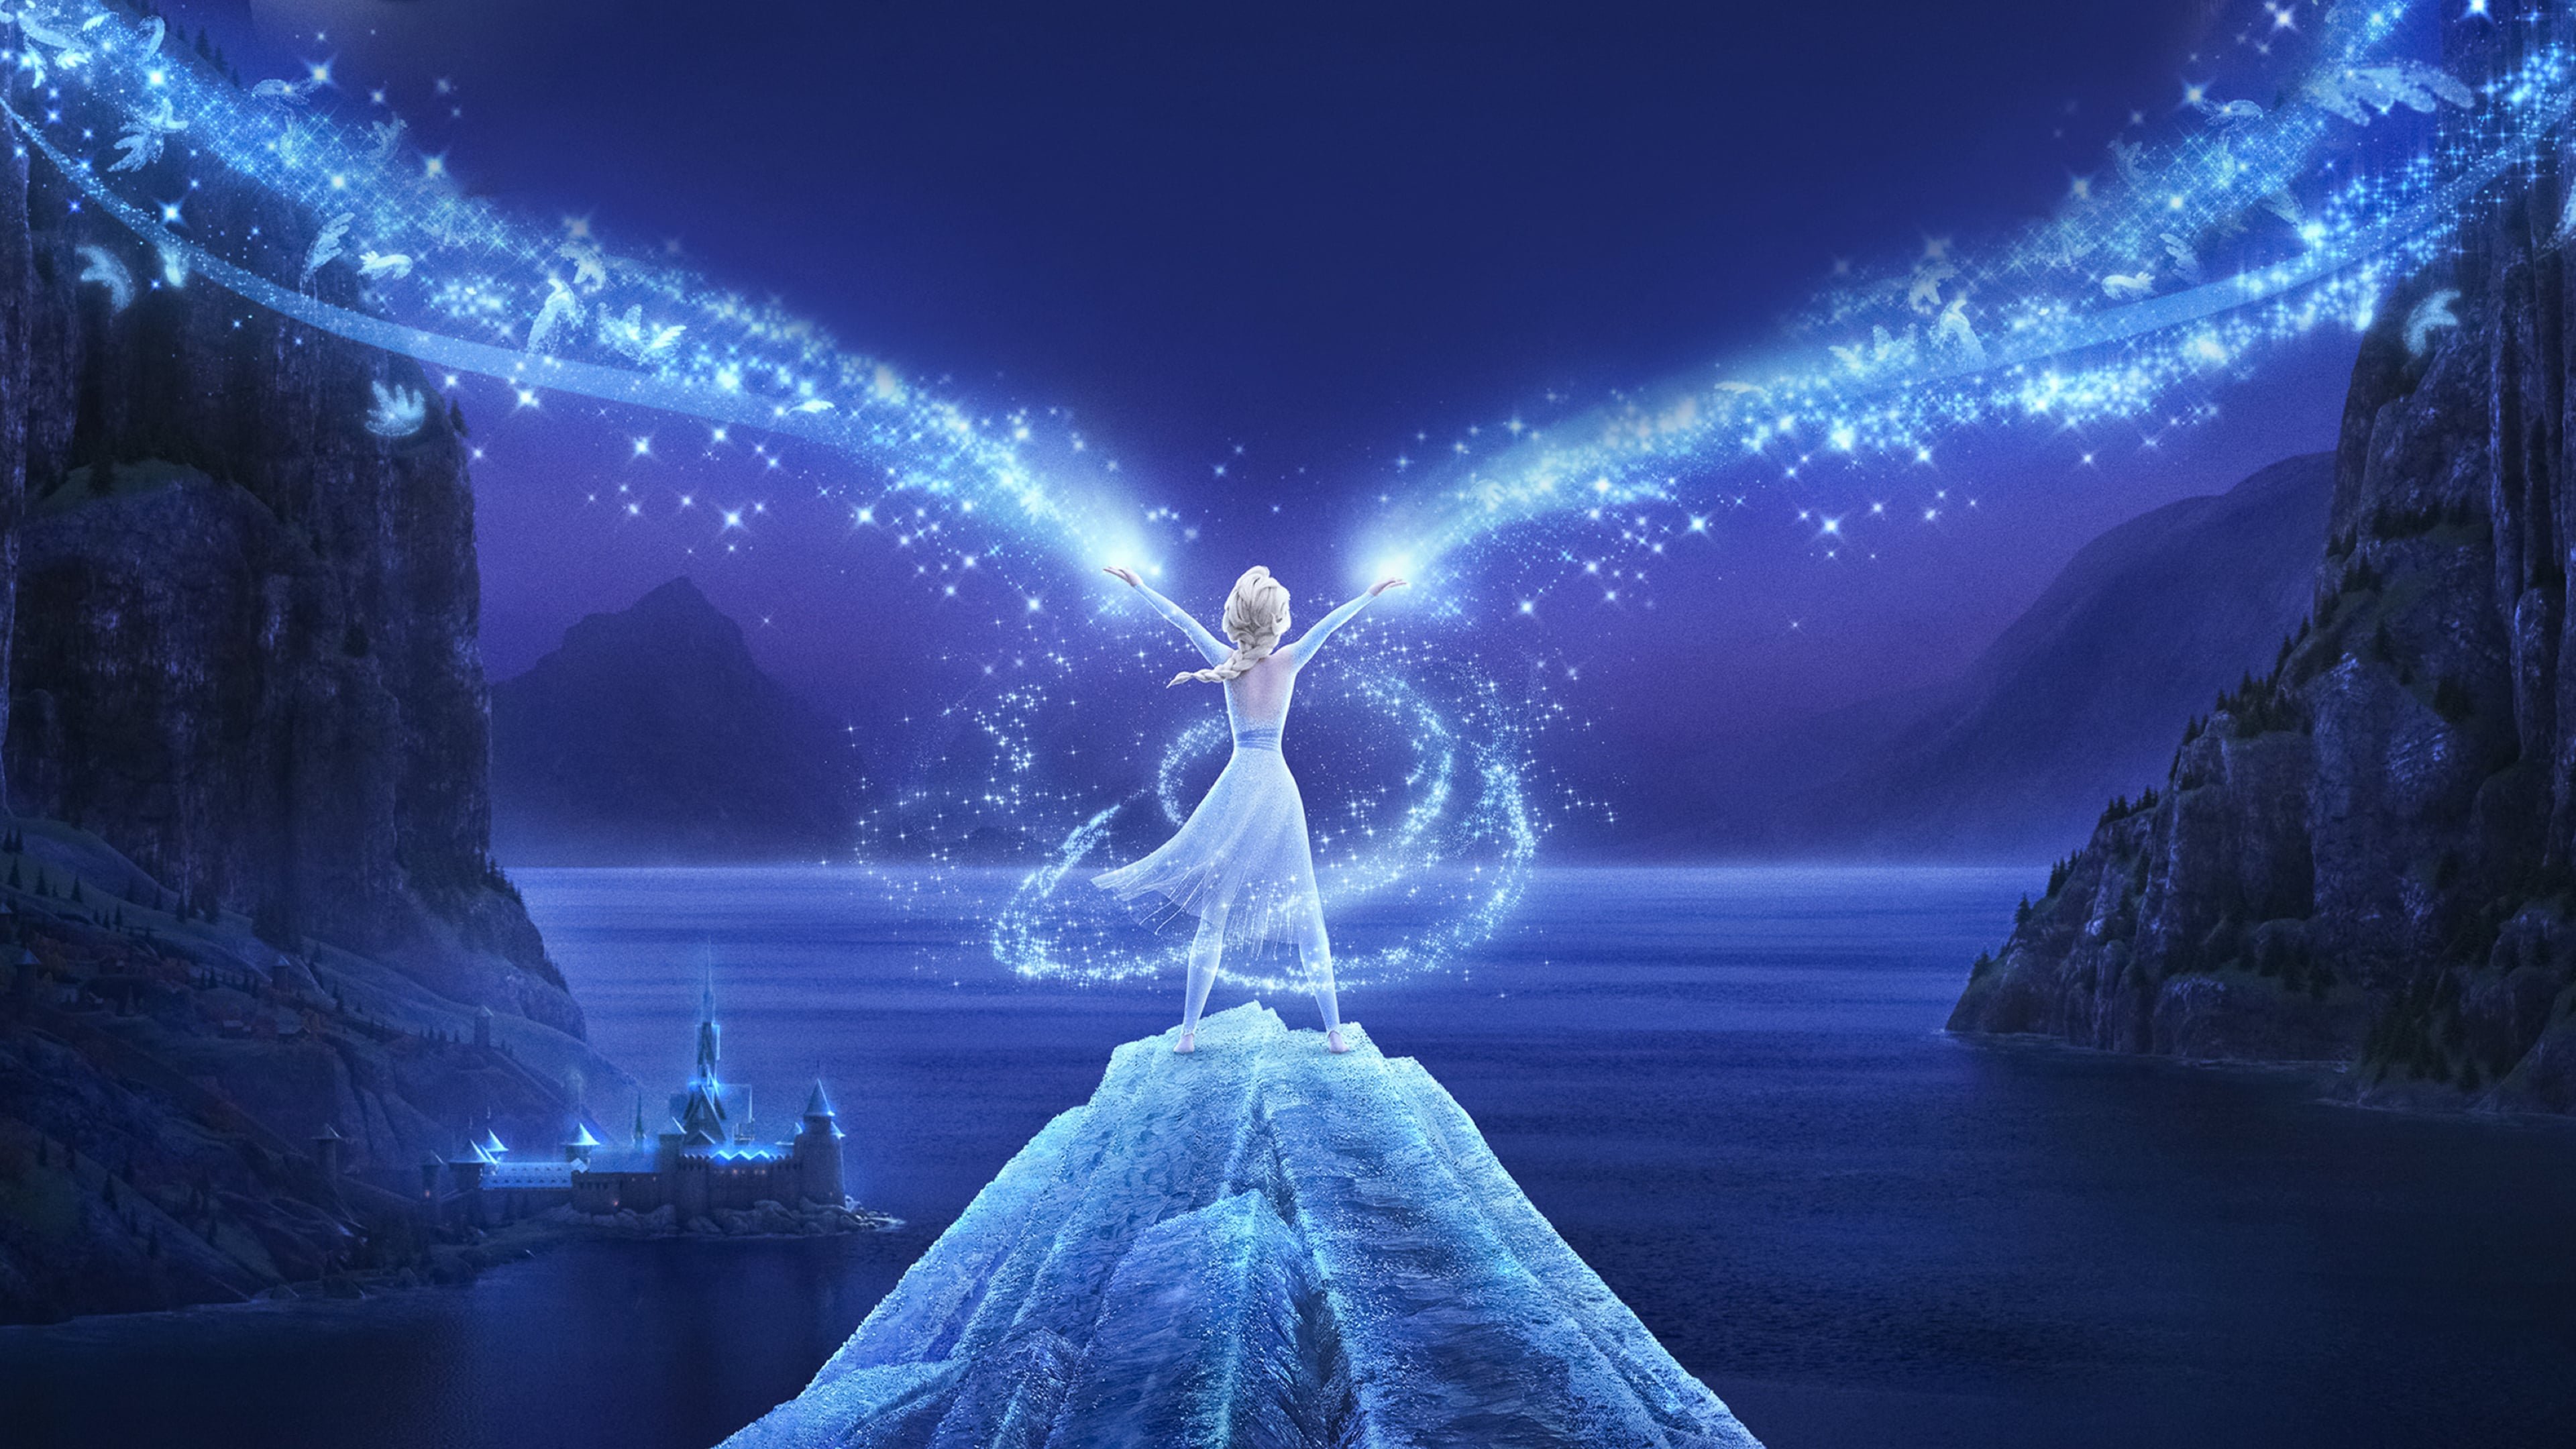 Frozen II (2019) Full Movie Free Download and Watch Online
Elsa, Anna, Kristoff and Olaf are going far in the forest to know the truth about an ancient mystery